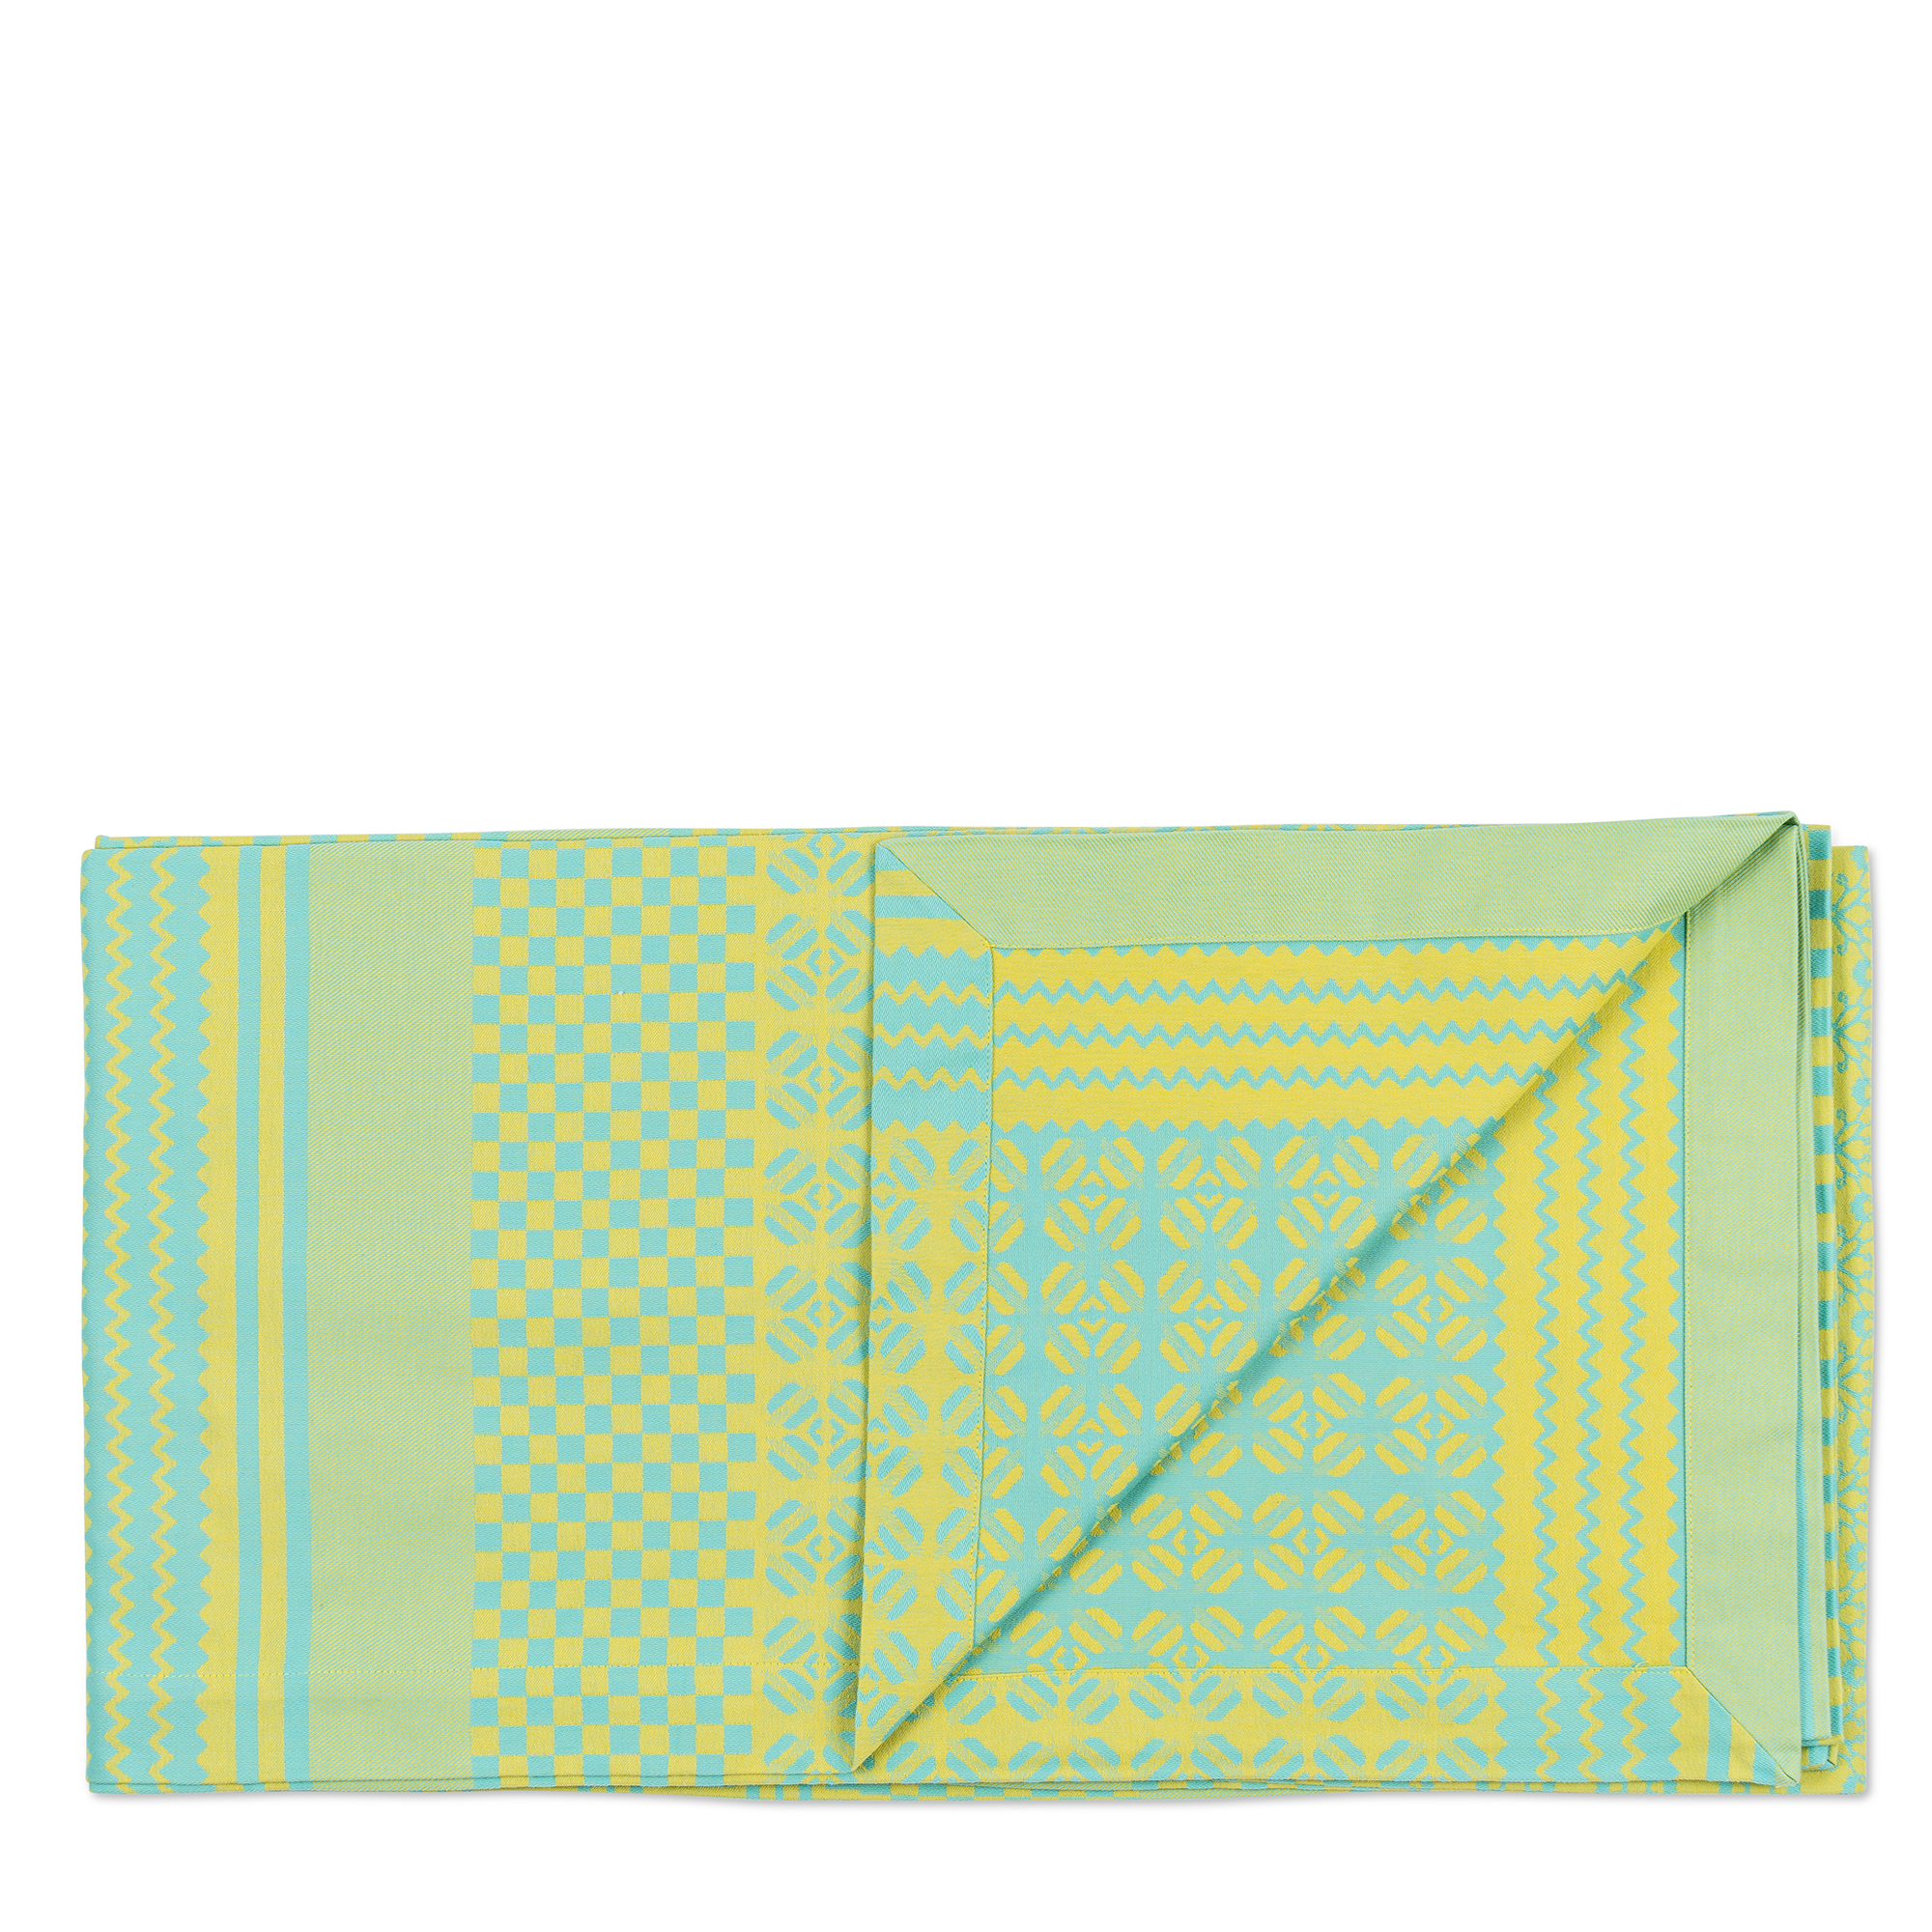 A unique tablecloth in yellow, green, and blue is inspired by Africa's culture, jacquard woven from 100% African cotton, and featuring a variety of African symbols and designs. Perfect for sparking conversation at your dinner table, complemented by the Penta Napkins for a coordinated setting.